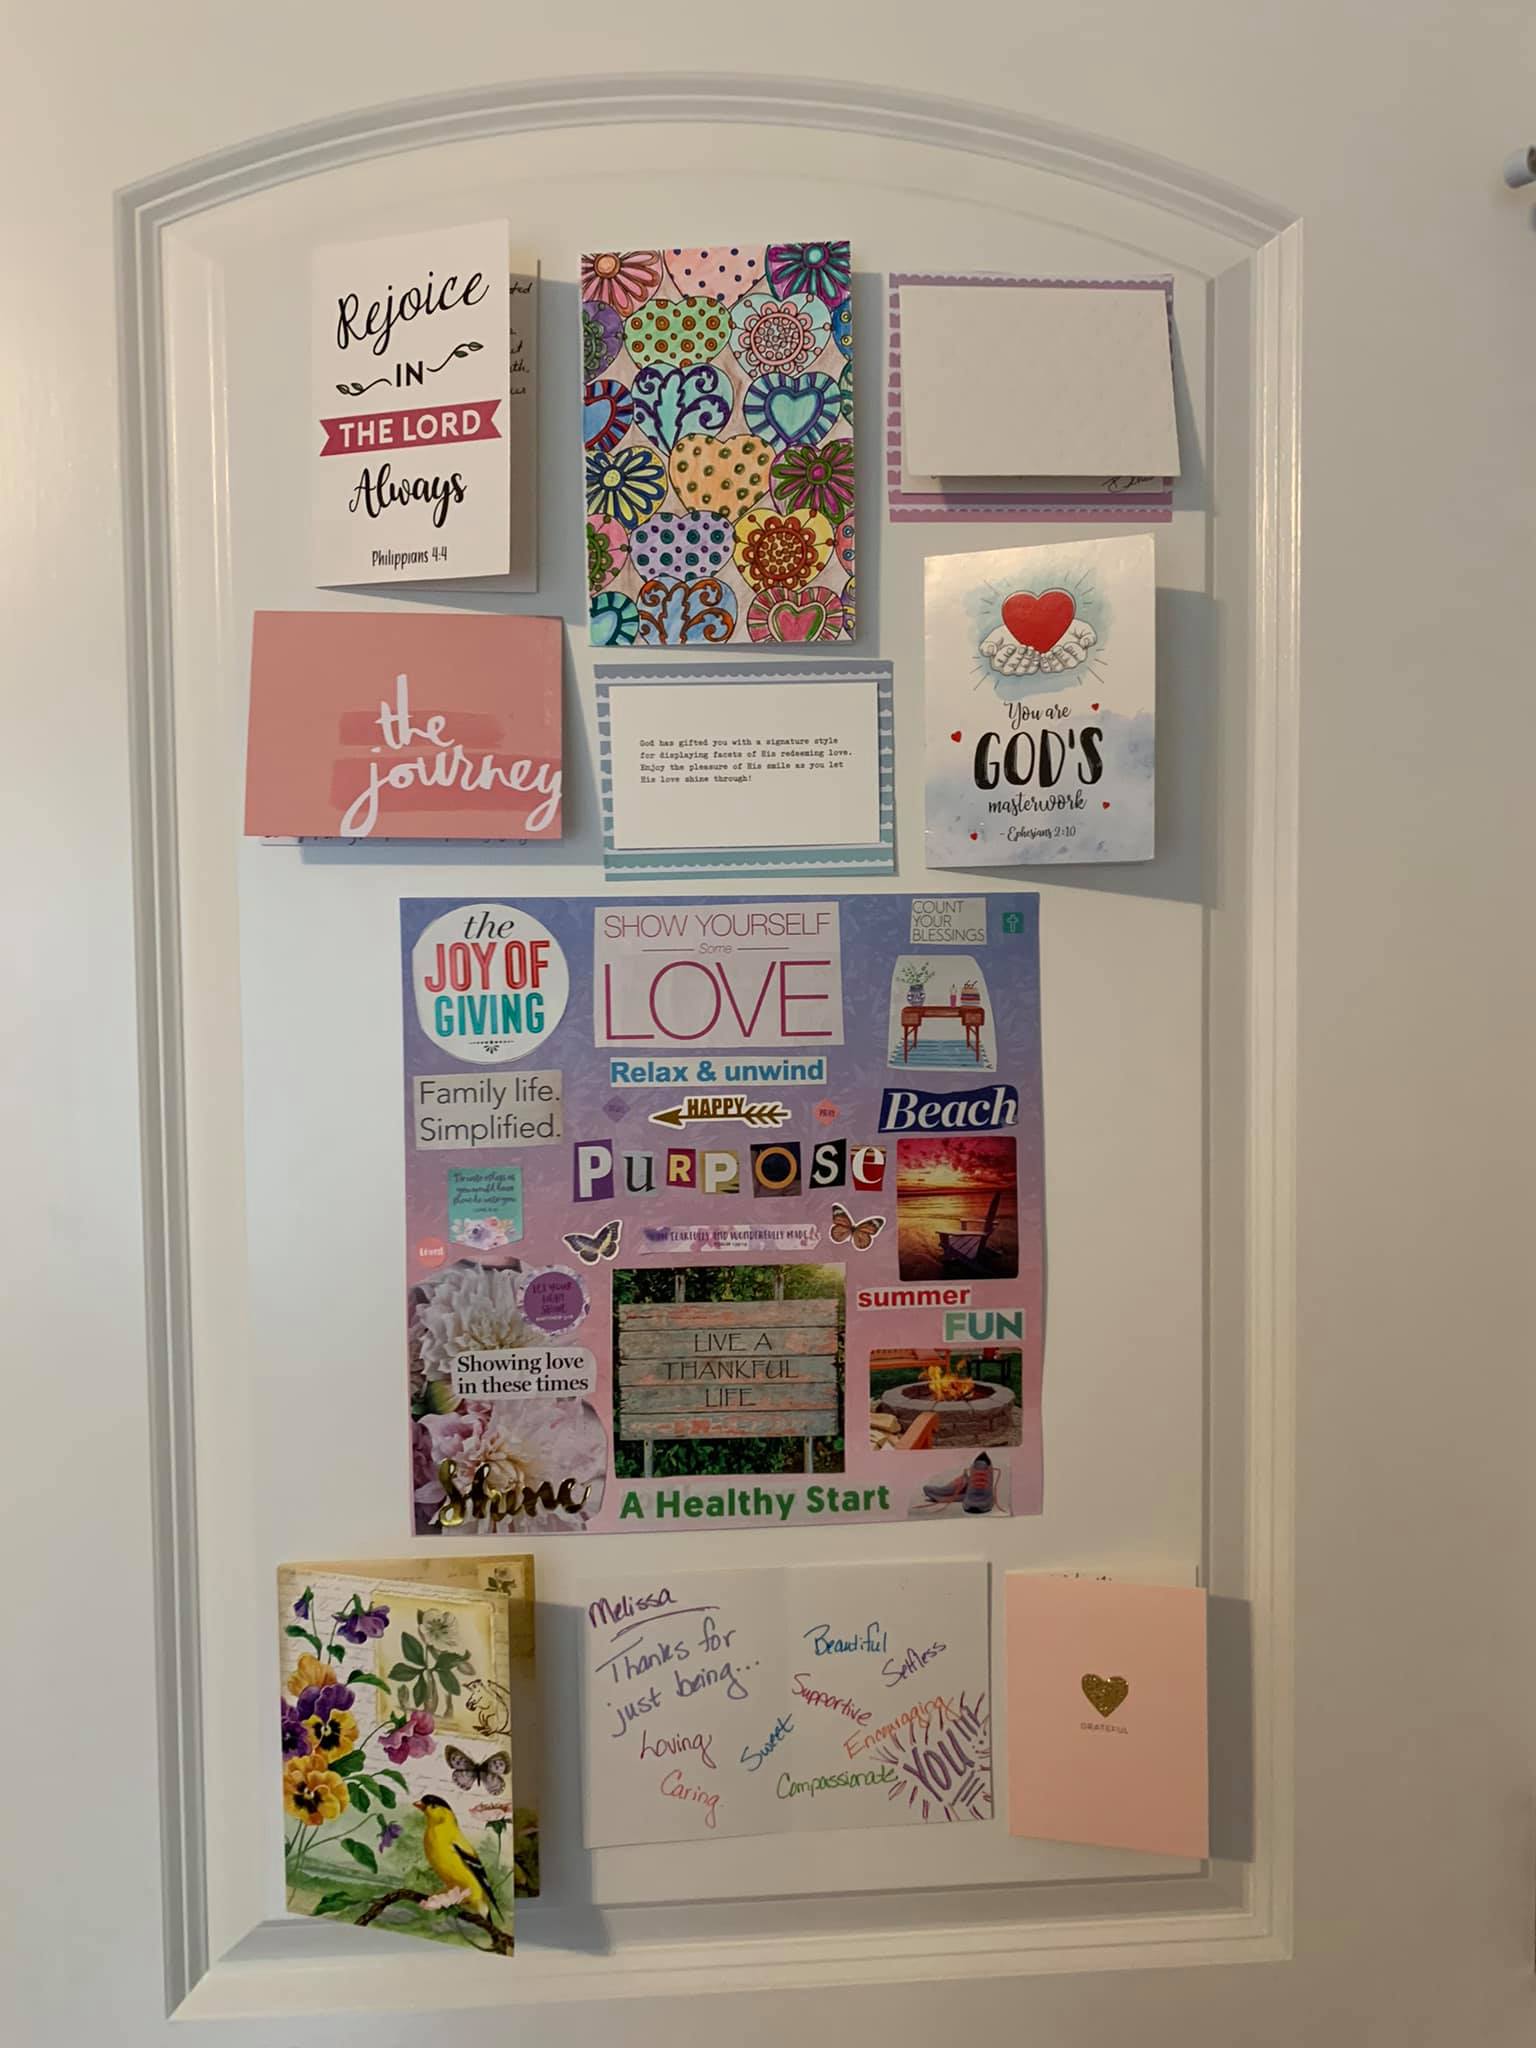 How to create an encouragement wall